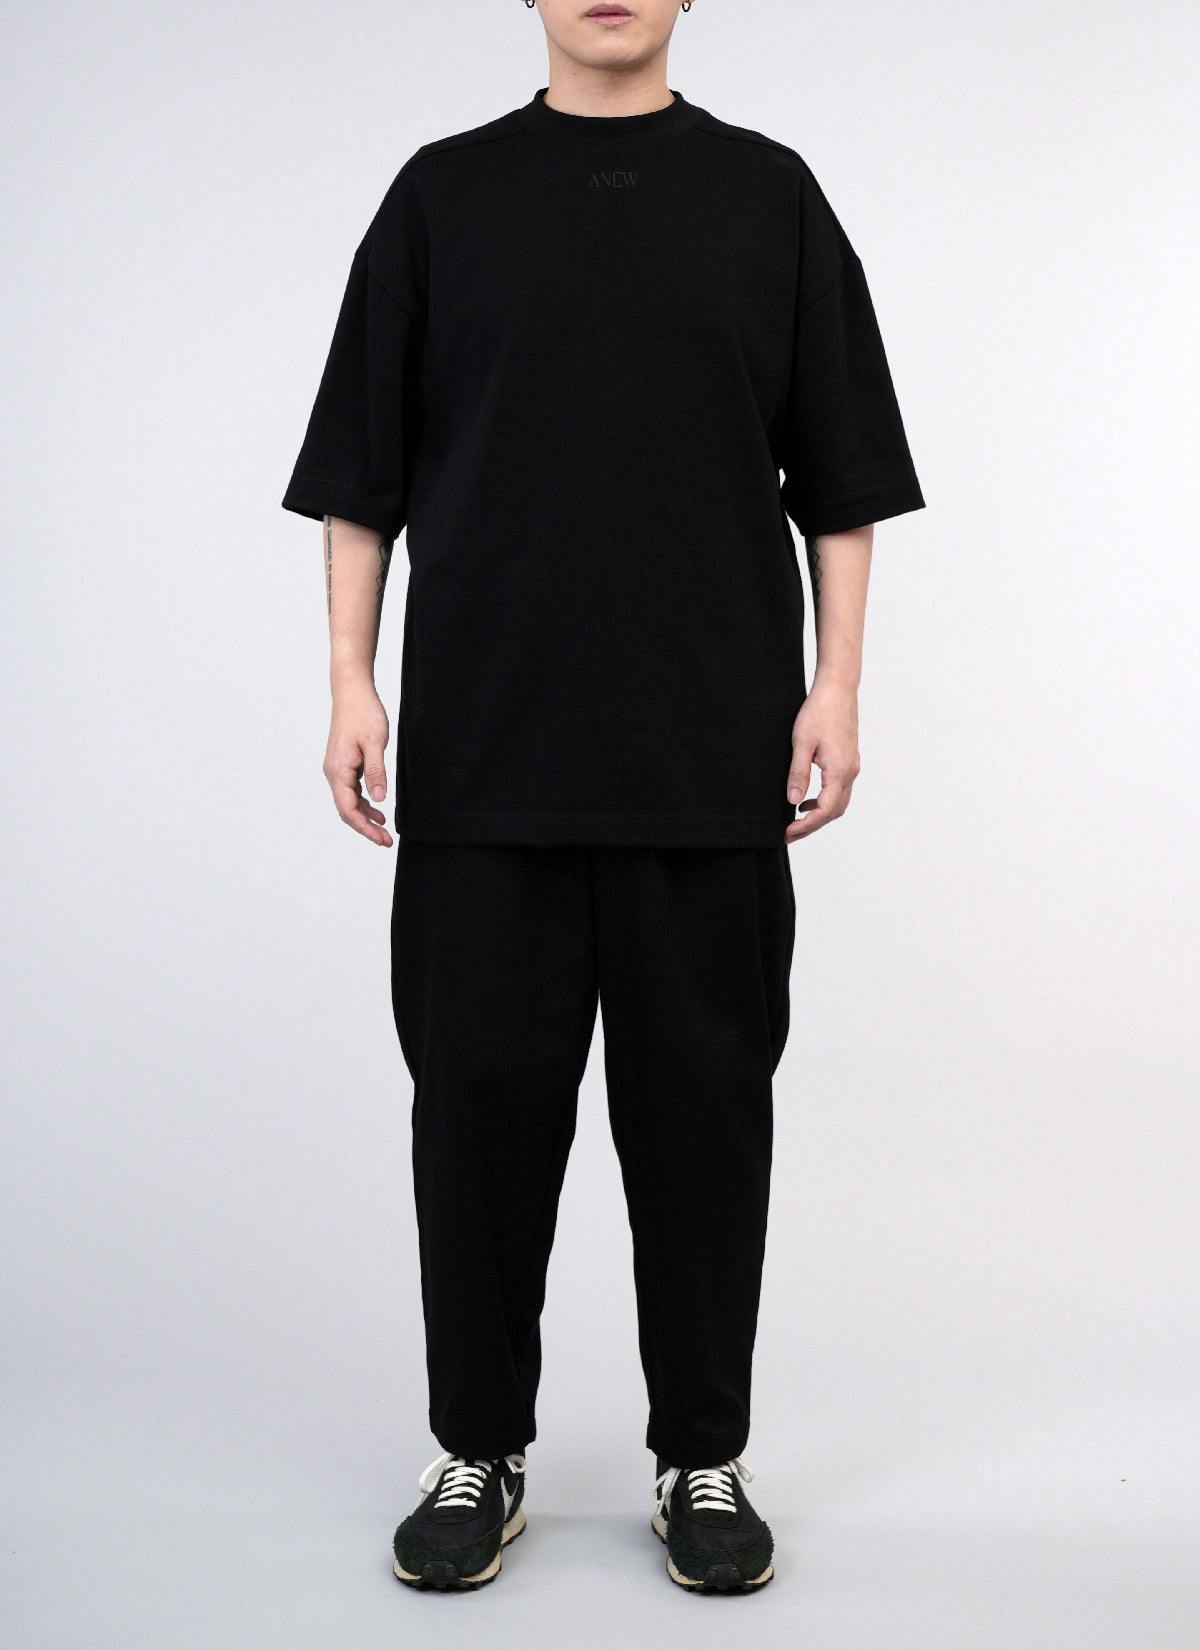 ˝ANEW˝  Relaxed T-Shirt Black/ Black